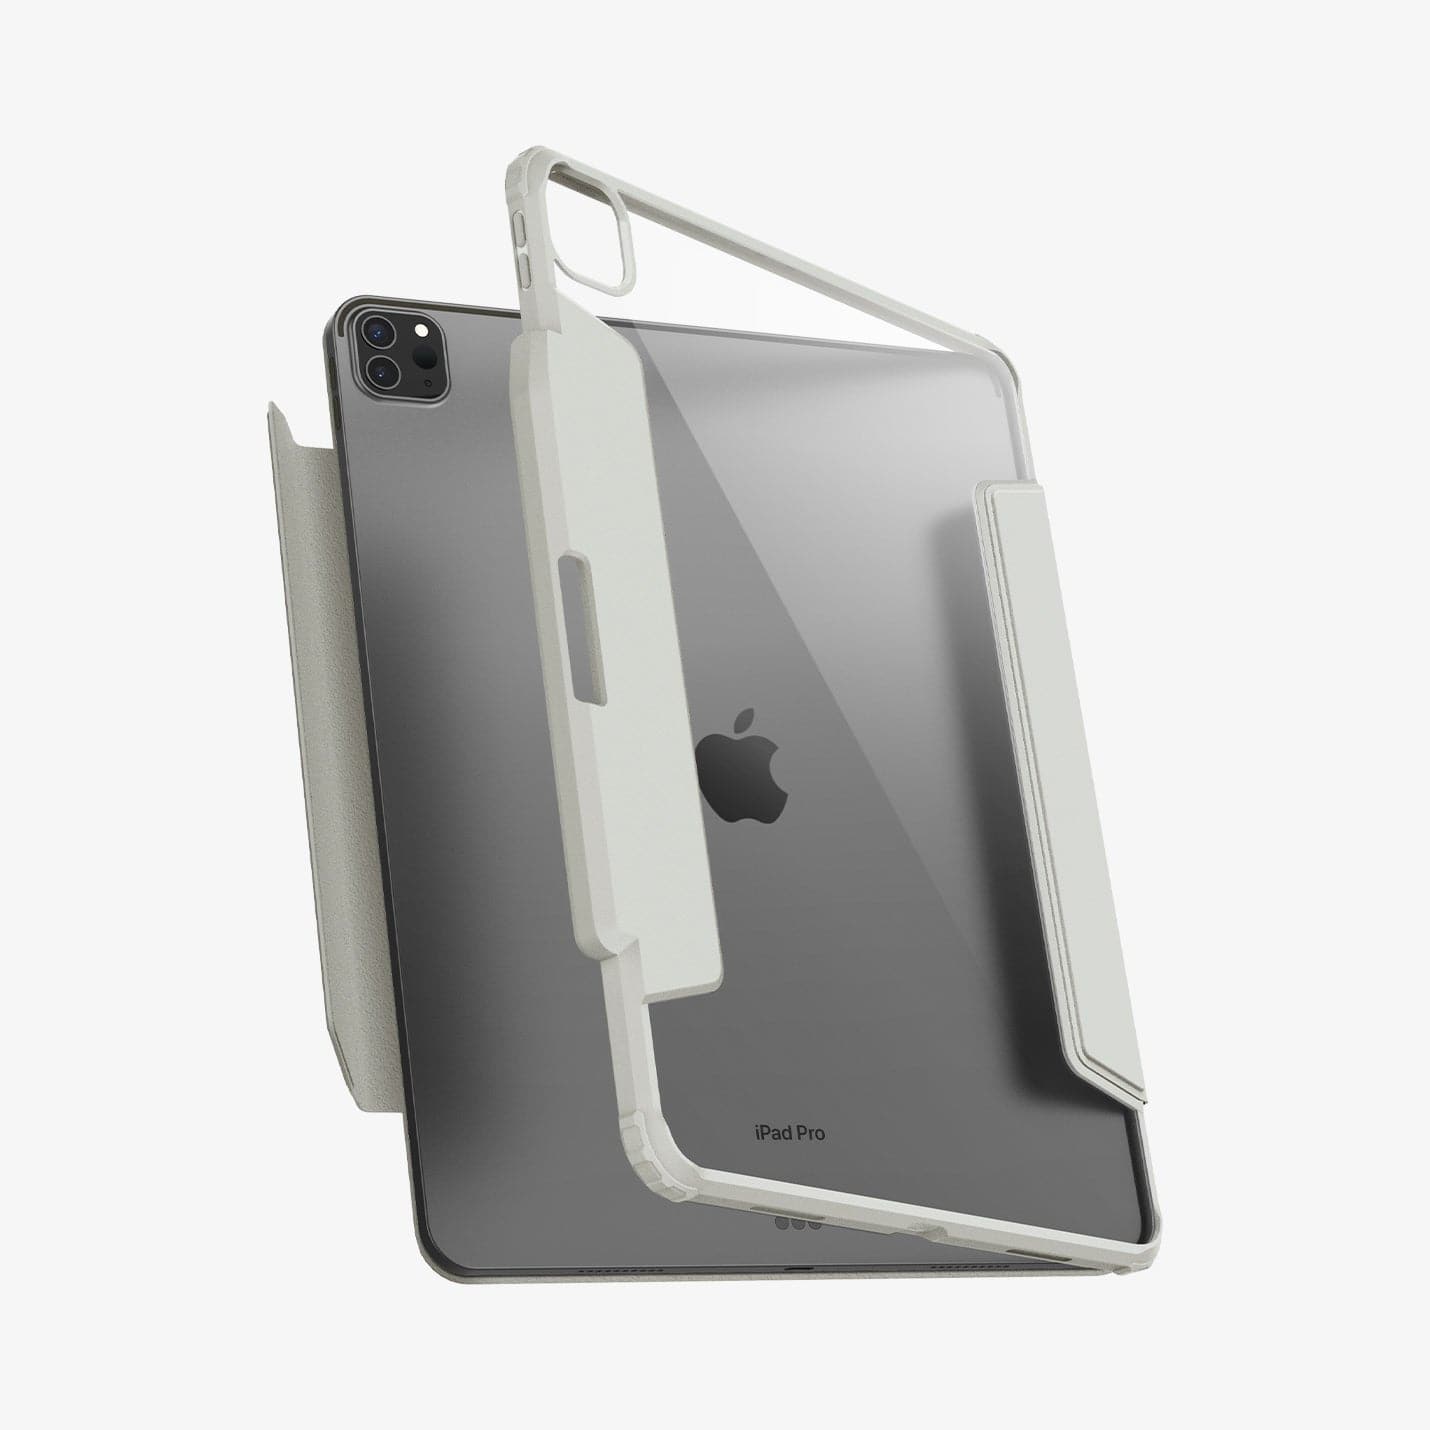  ACS06076 - iPad Pro 12.9" Case Air Skin Pro in gray showing the back with case hovering away from device